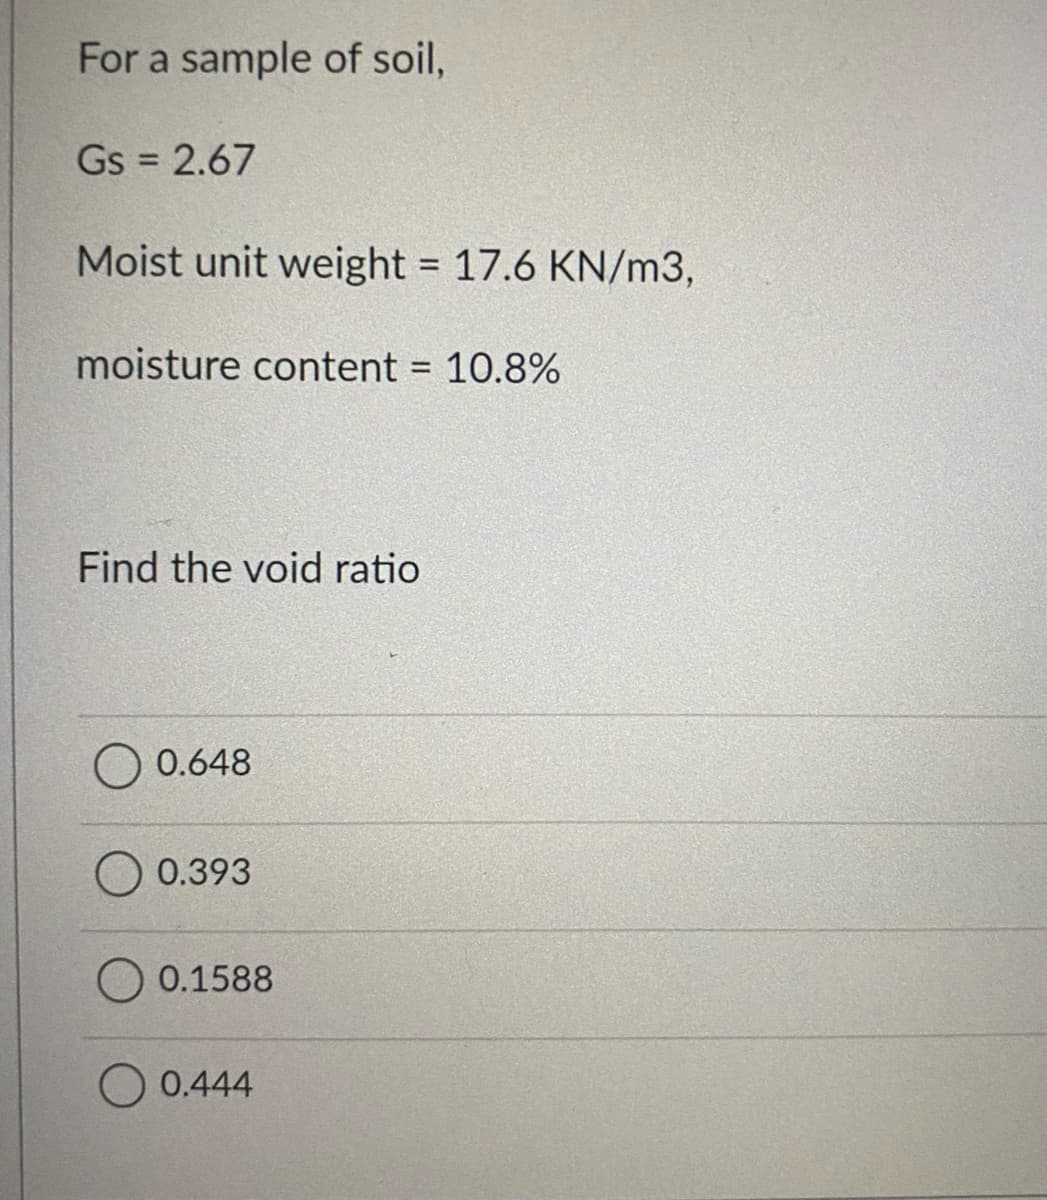 For a sample of soil,
Gs = 2.67
Moist unit weight = 17.6 KN/m3,
moisture content = 10.8%
%3D
Find the void ratio
0.648
O 0.393
0.1588
O 0.444
